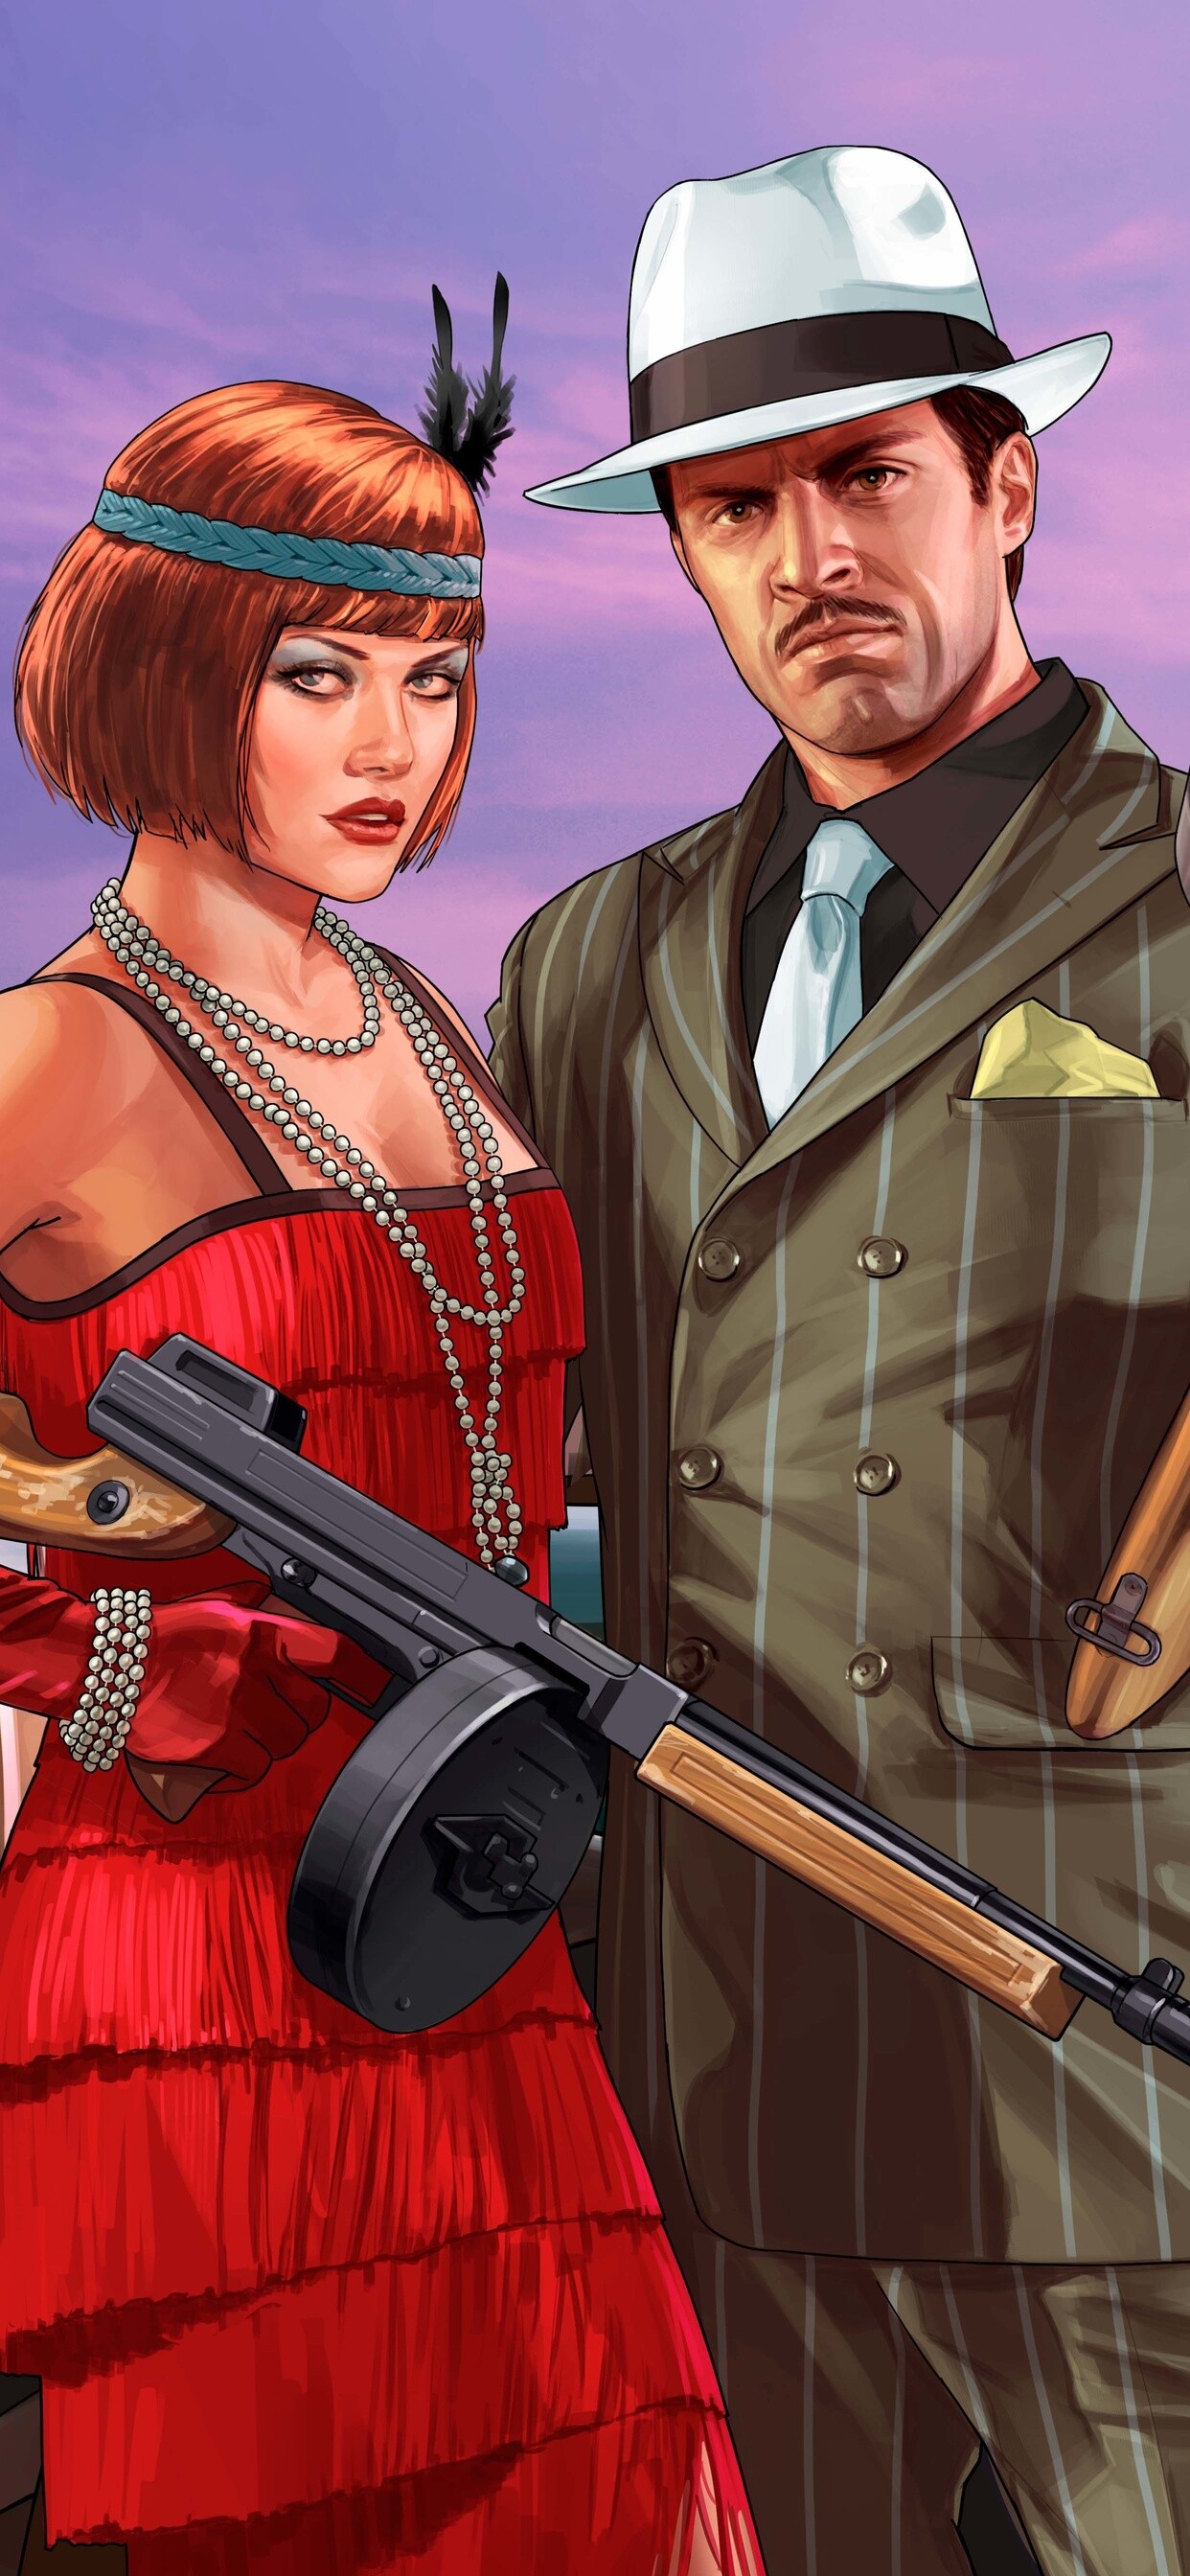 Grand Theft Auto 5: An action-adventure game developed by Rockstar North, Game characters. 1250x2690 HD Background.